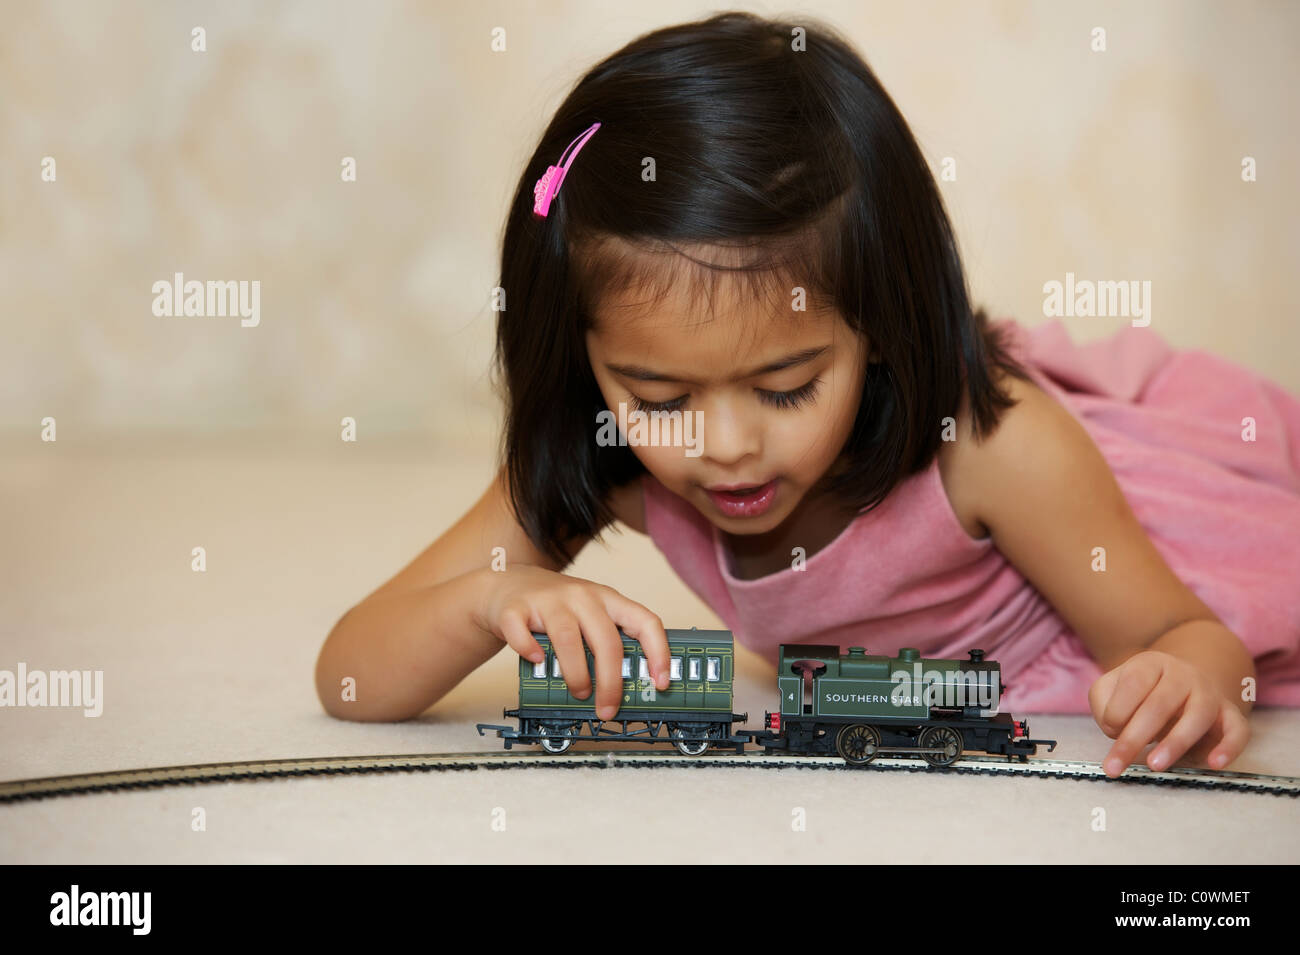 A young girl playing with her toy train set Stock Photo